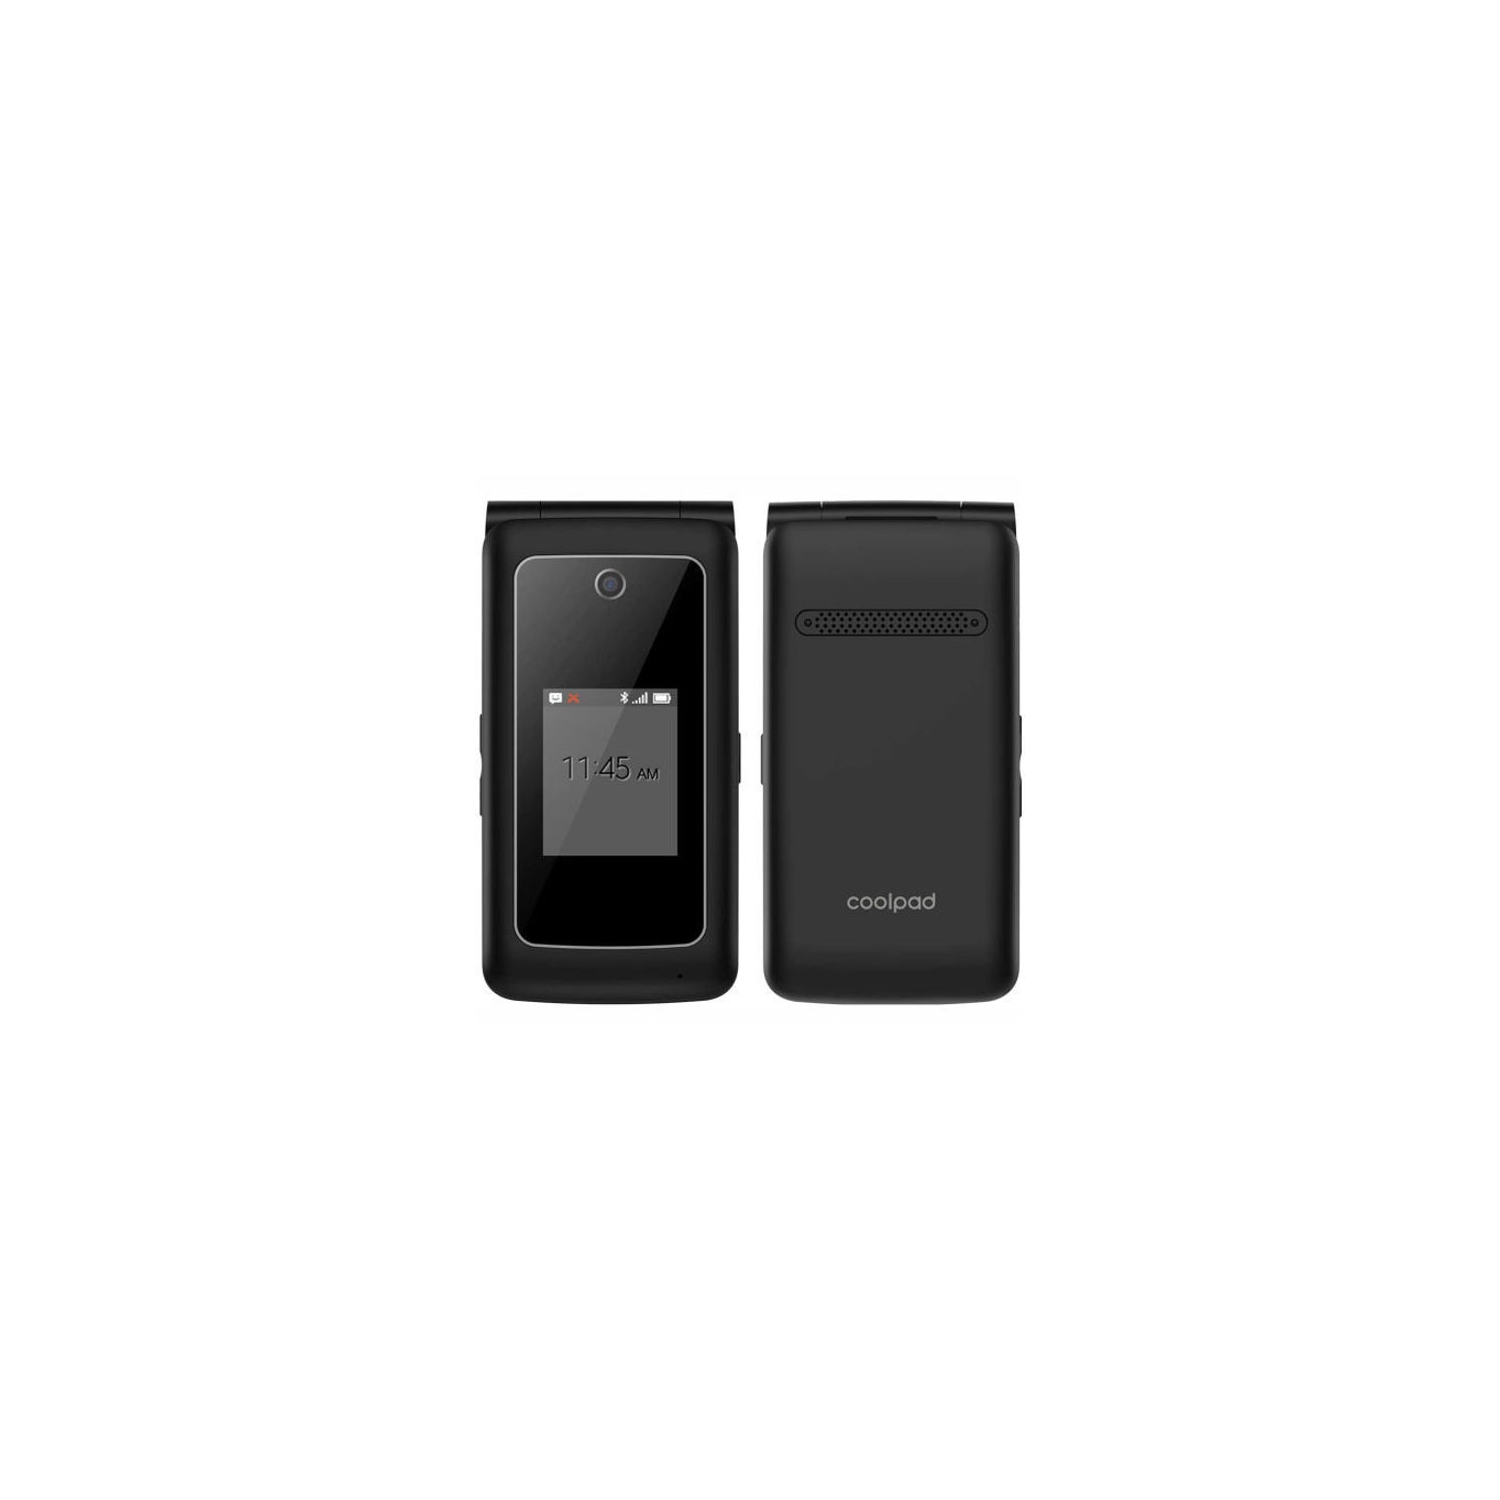 Refurbished (Excellent) - Coolpad Snap Unlocked 4G LTE Flip Cell Phone - Black - Certified Refurbished (Like New)